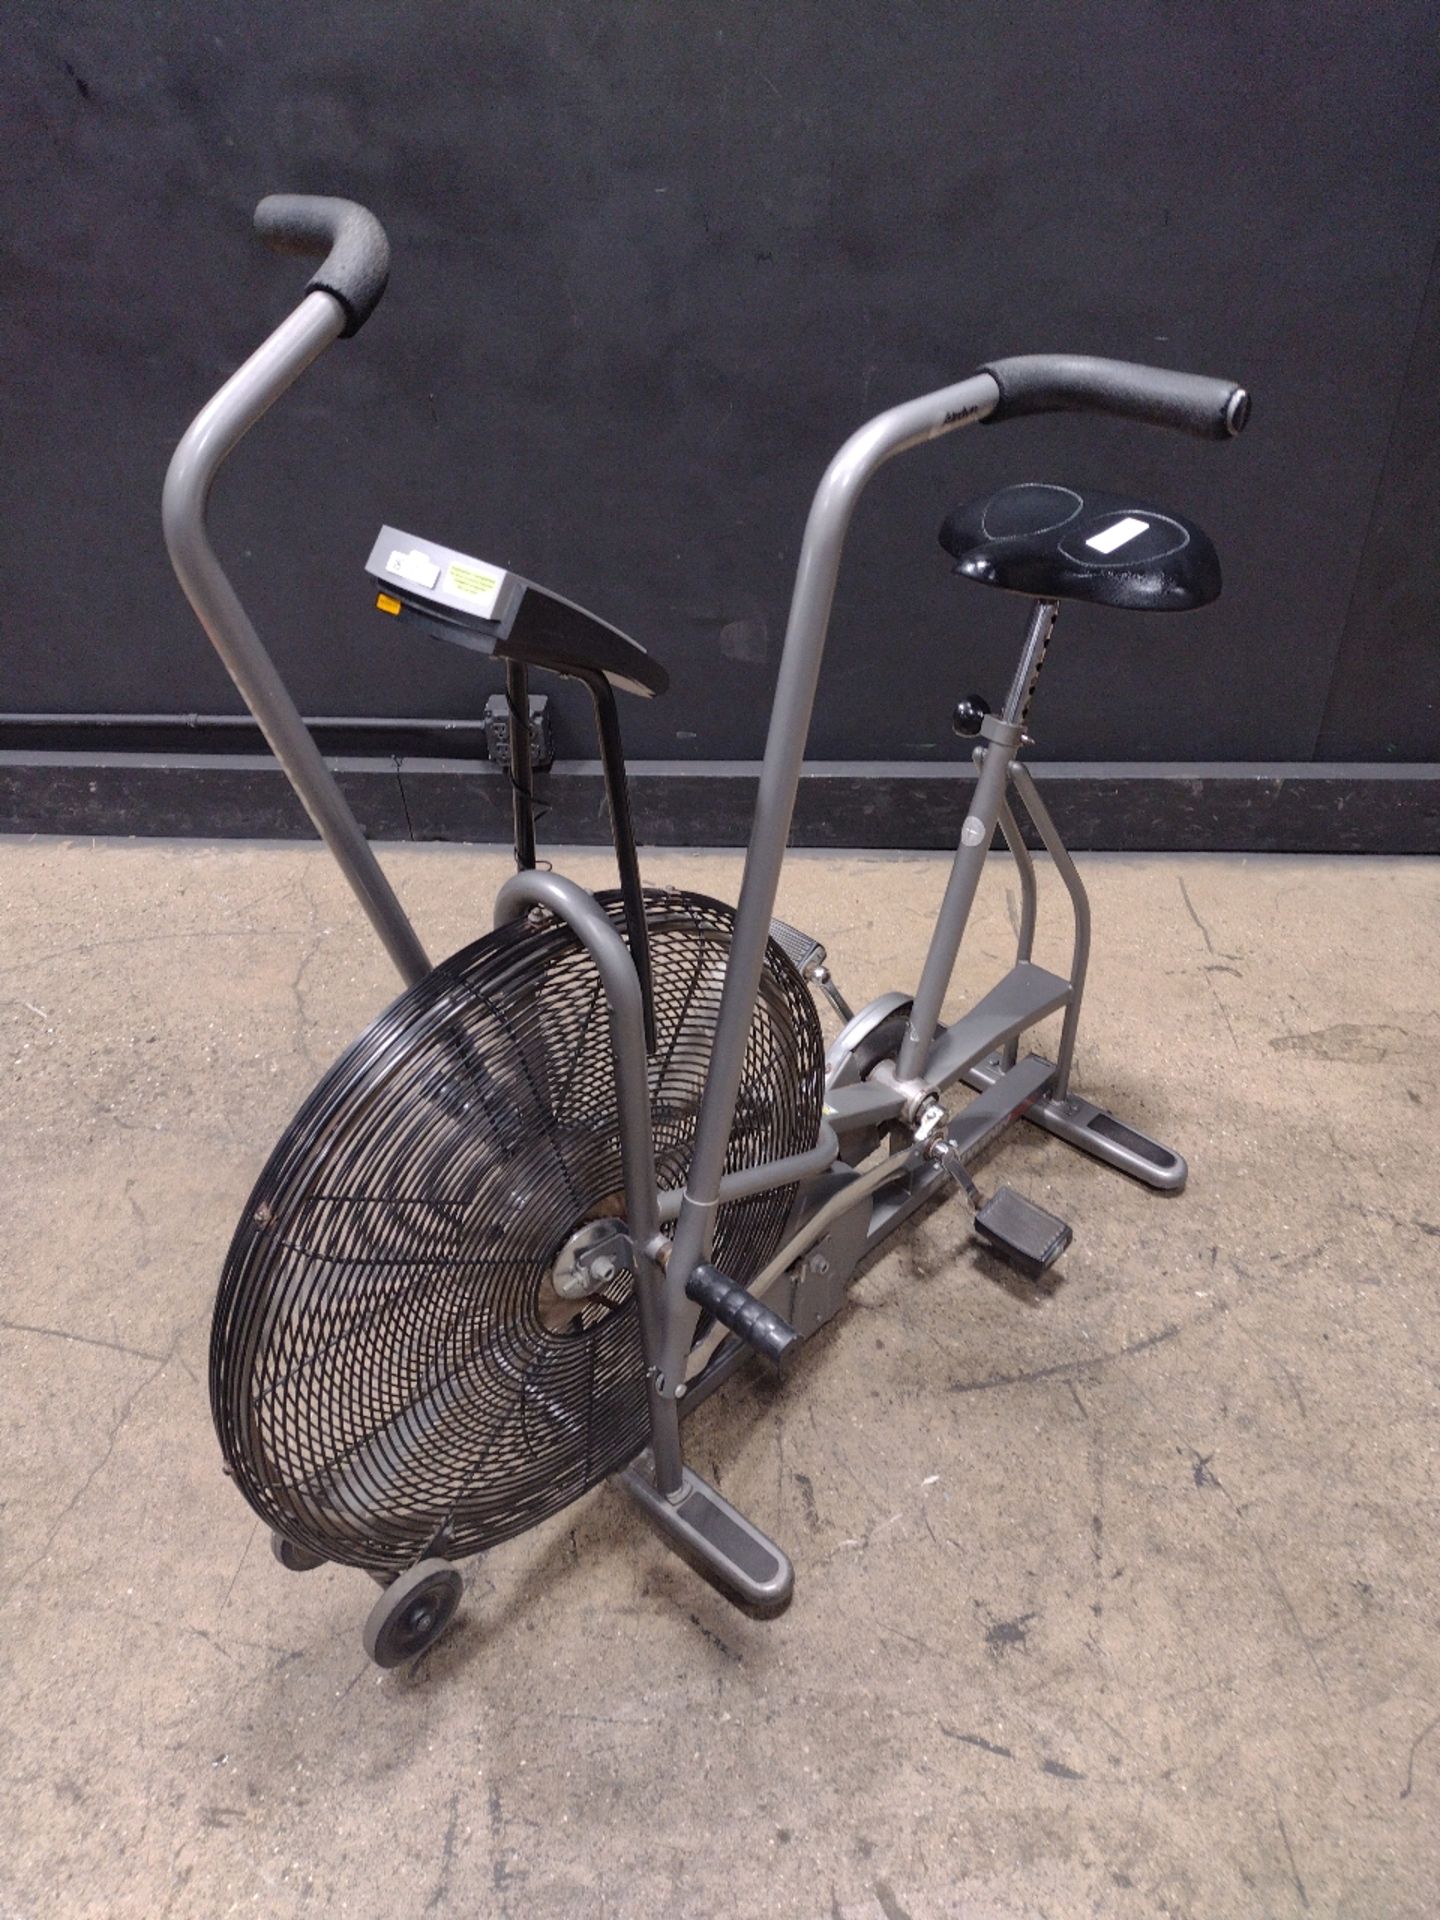 SCHWINN AIRDYNE EXERCISE BIKE (LOCATED AT 3325 MOUNT PROSPECT ROAD, FRANKLIN PARK, IL, 60131) - Image 2 of 4